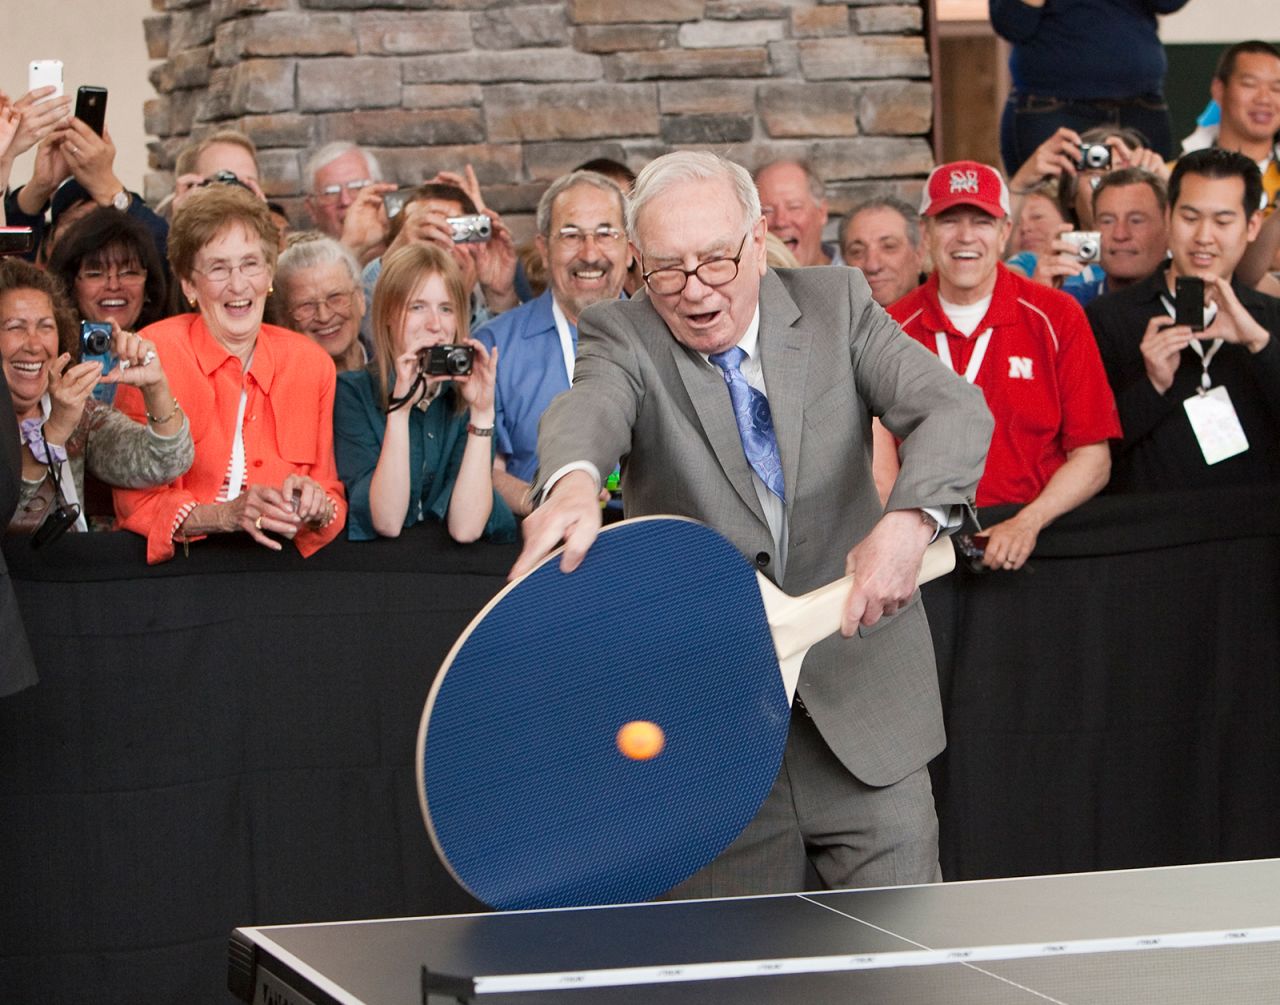 Buffett uses a large paddle to play table tennis in 2010.